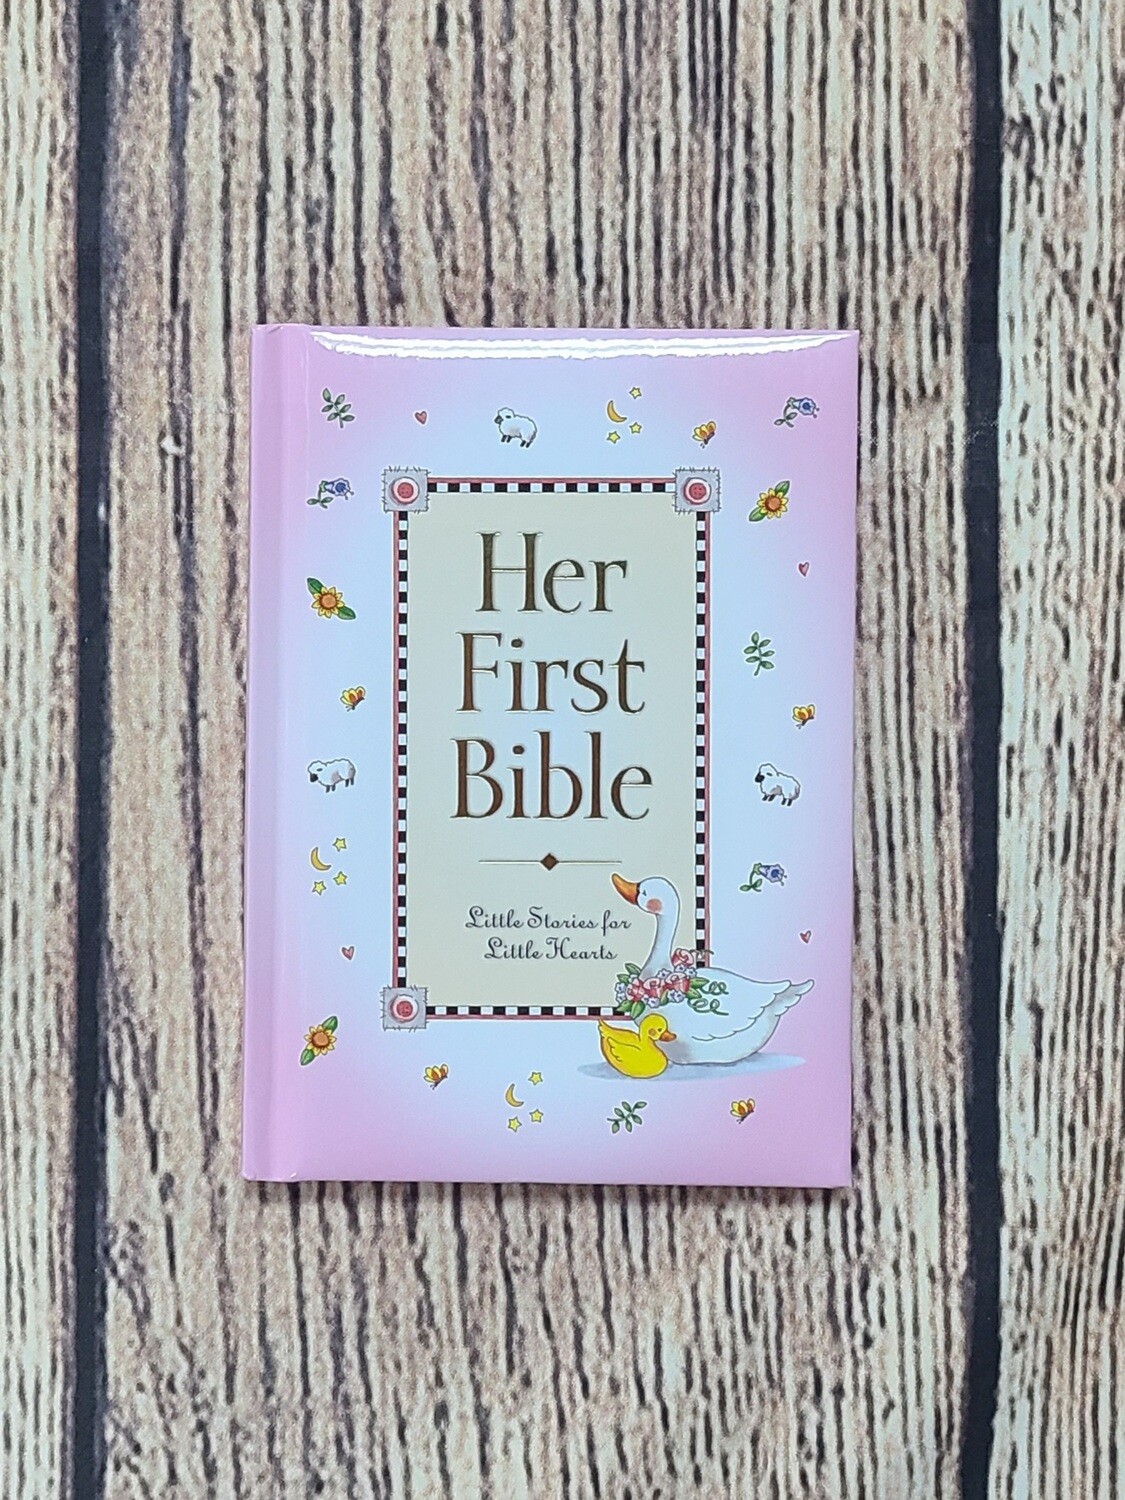 Her First Bible - Hardcover